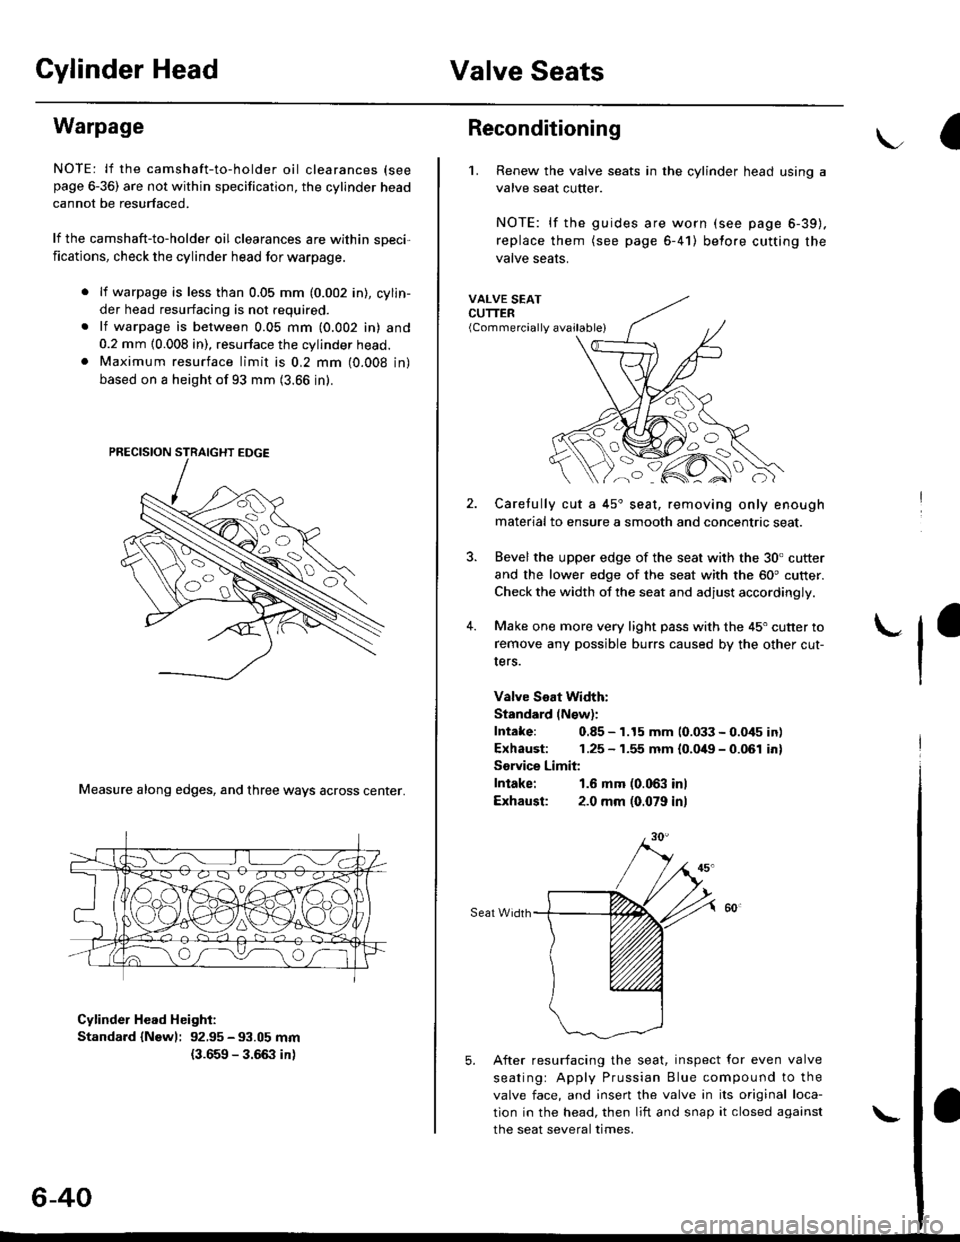 HONDA CIVIC 1996 6.G Workshop Manual Cylinder HeadValve Seats
Warpage
NOTE: lf the camshaft-to-holder oil clearances (see
page 6-36) are not within specification, the cylinder head
cannot be resurfaced.
lf the camshaft-to-holder oil clea